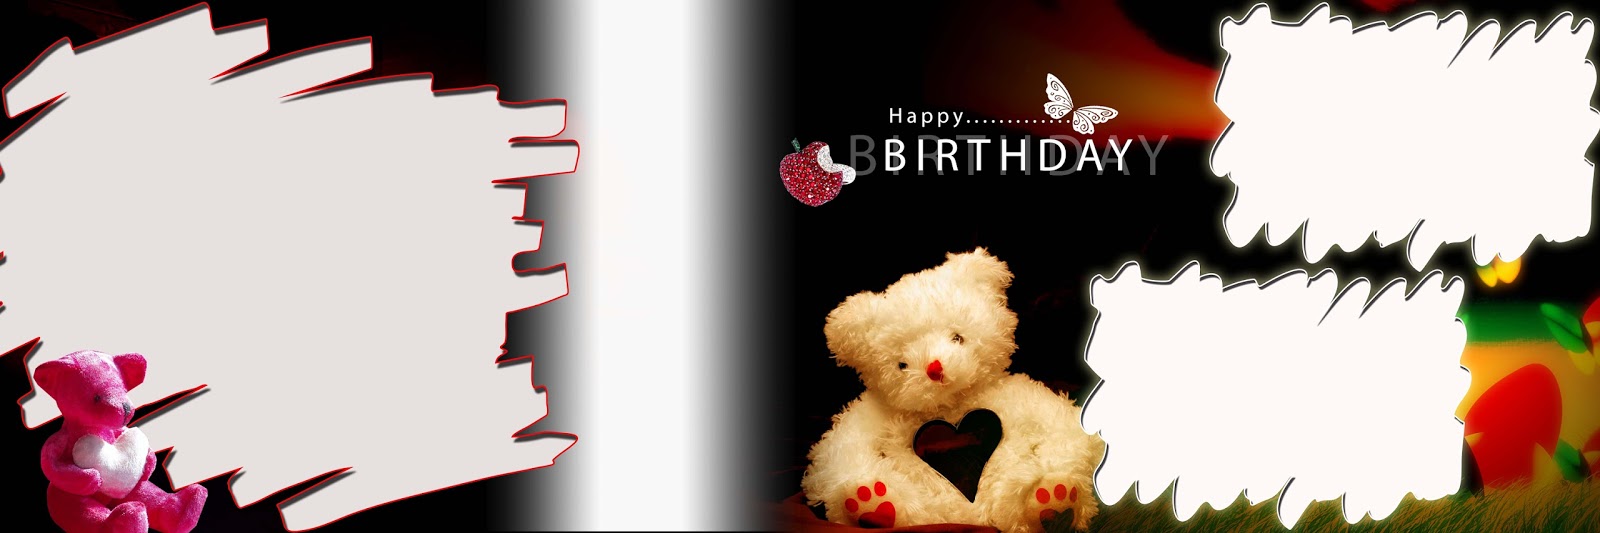 Psd Birthday Backgrounds For Photoshop Free Download StudioPk